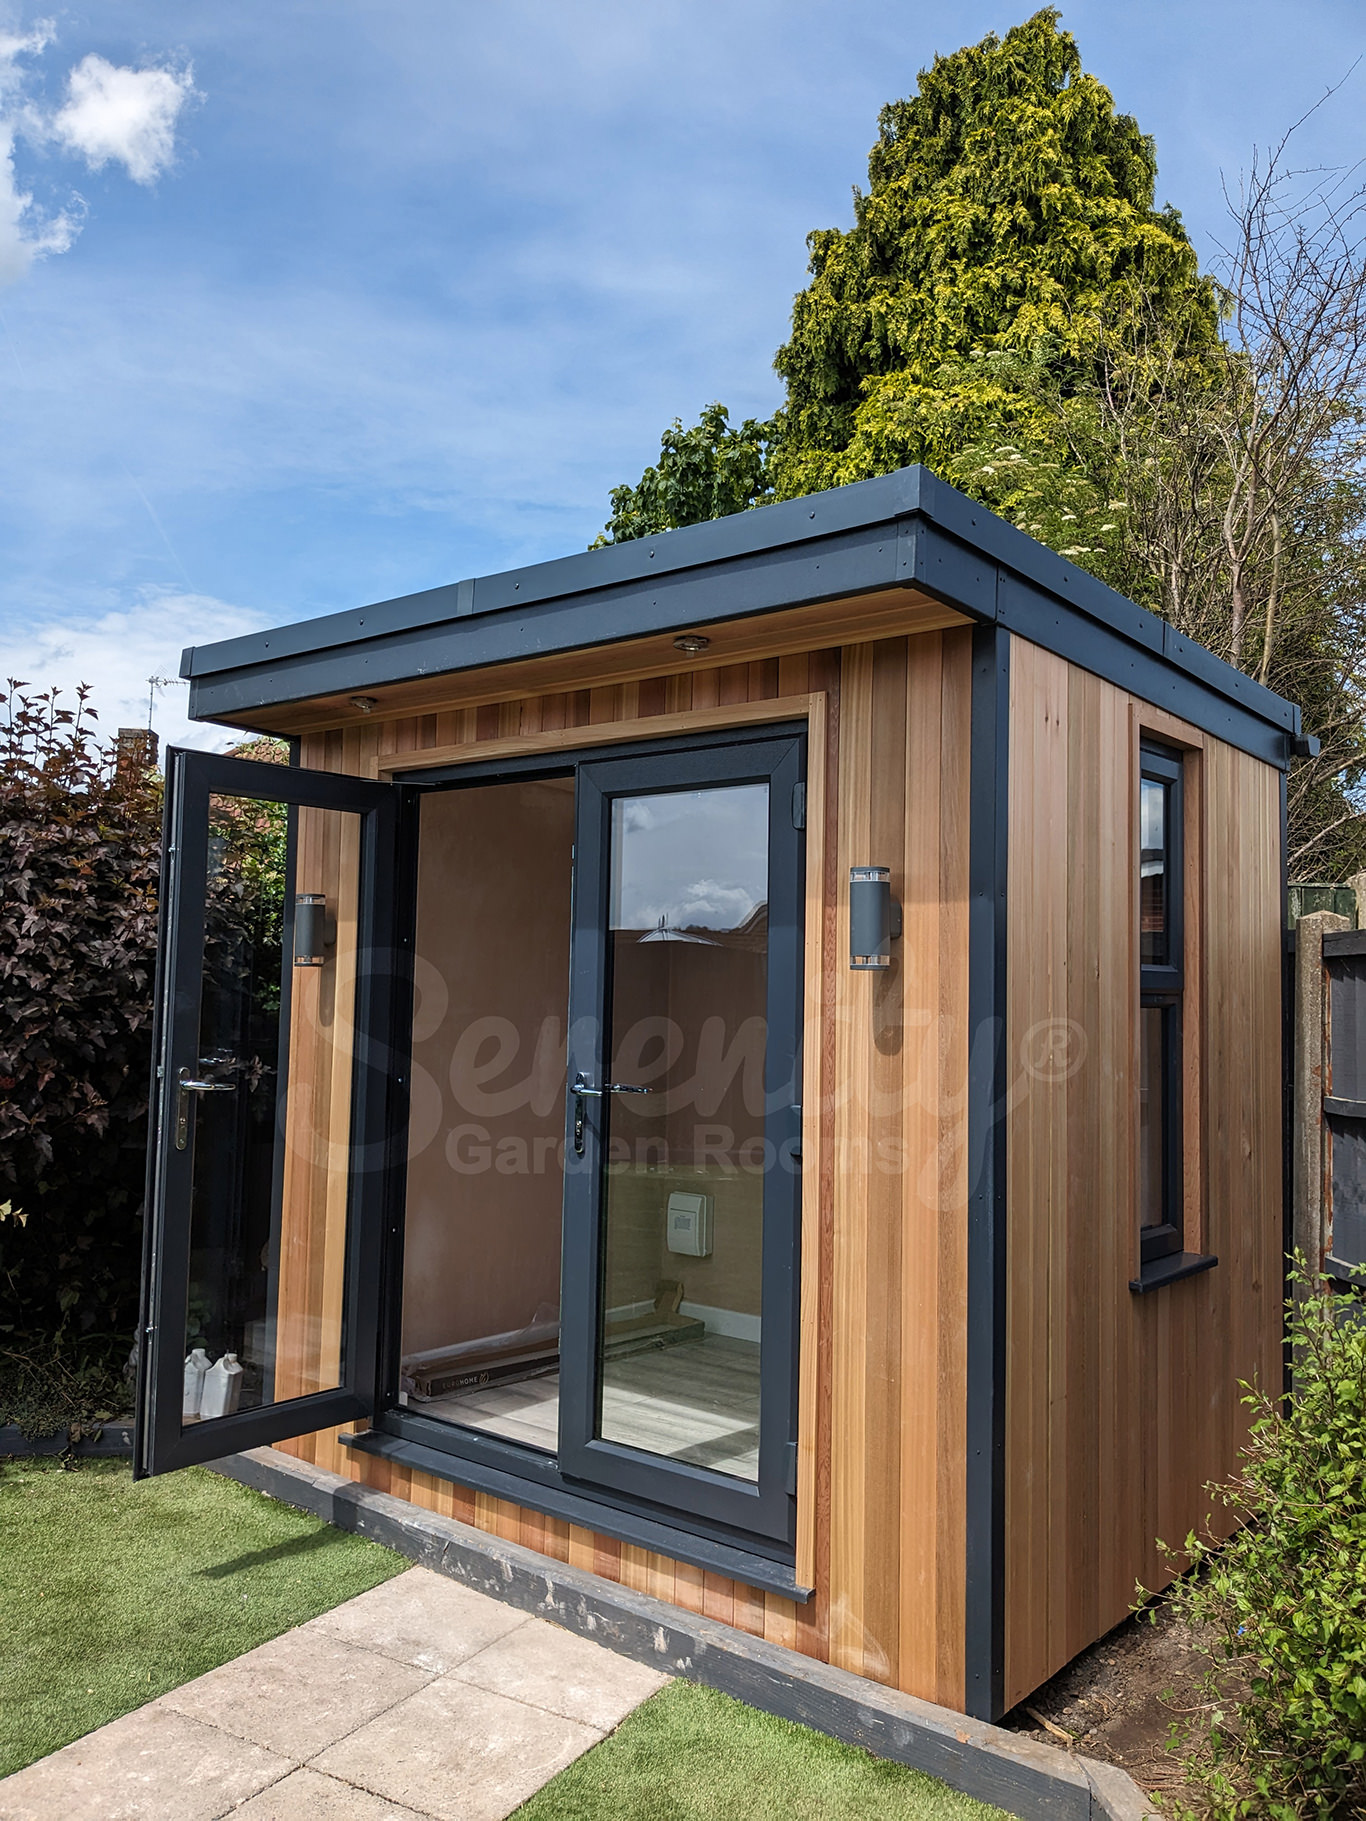 <h2>Mansfield - 8ft x 6ft Canopy Garden Room</h2>